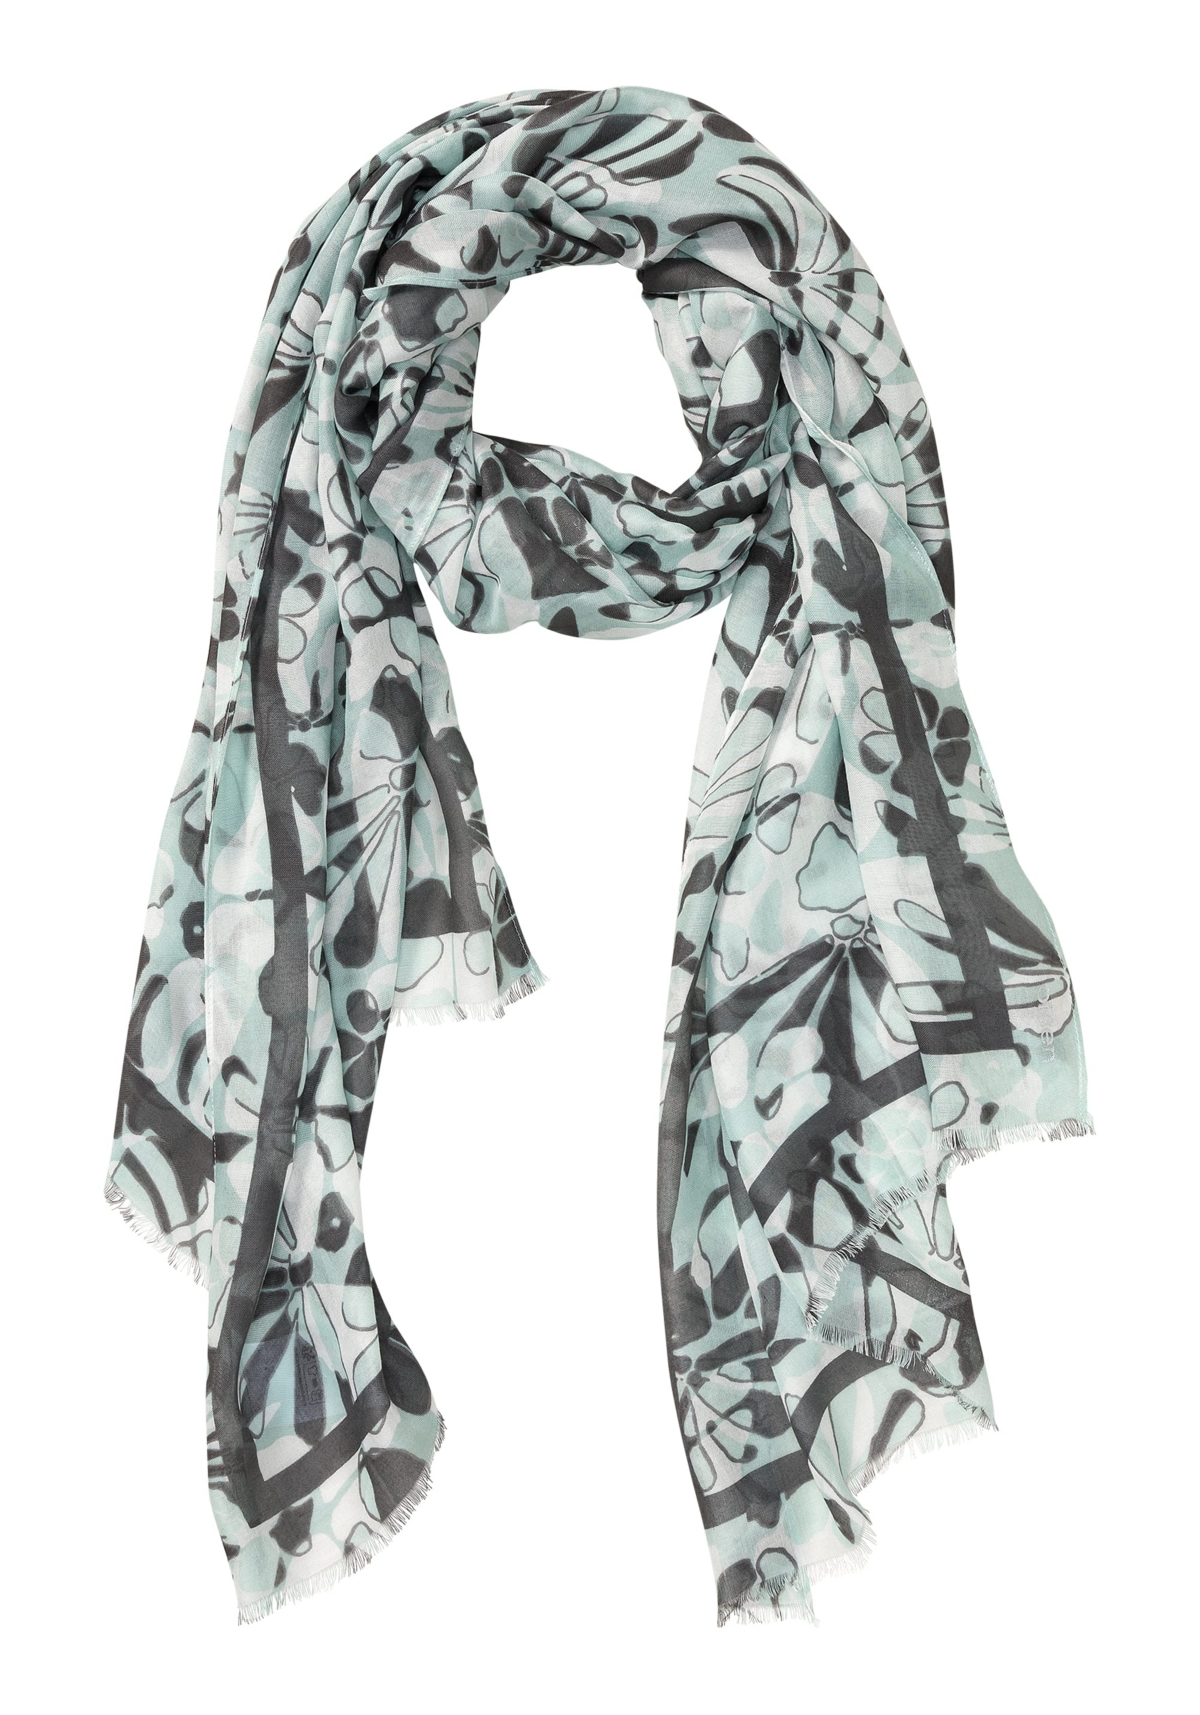 Abstract Floral and Border Print Scarf with Frayed Edge Trim - Ice aqua